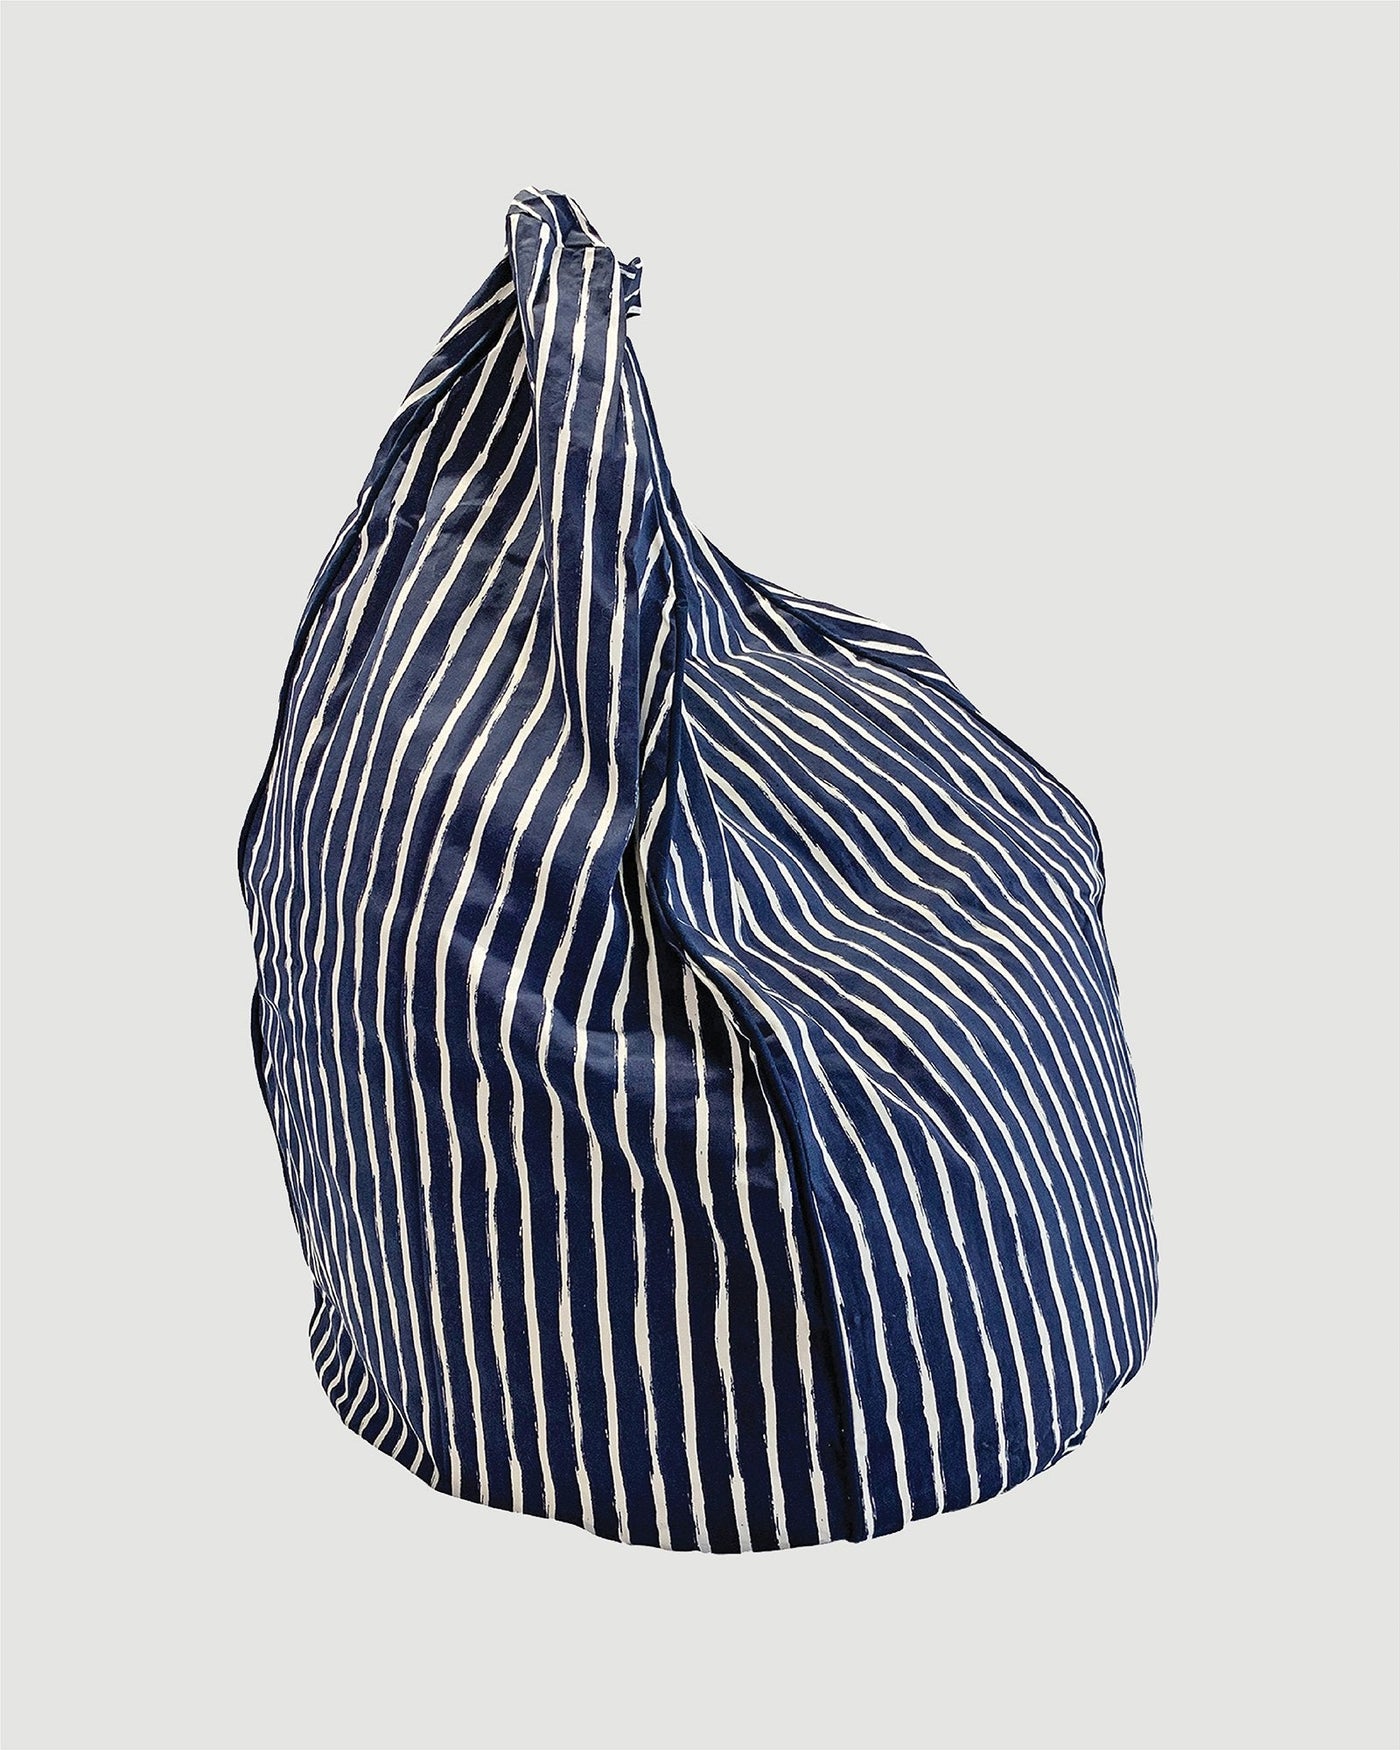 Bean Bag Cover - Navy Stripe - Small Bean Bags Cocoon Couture 